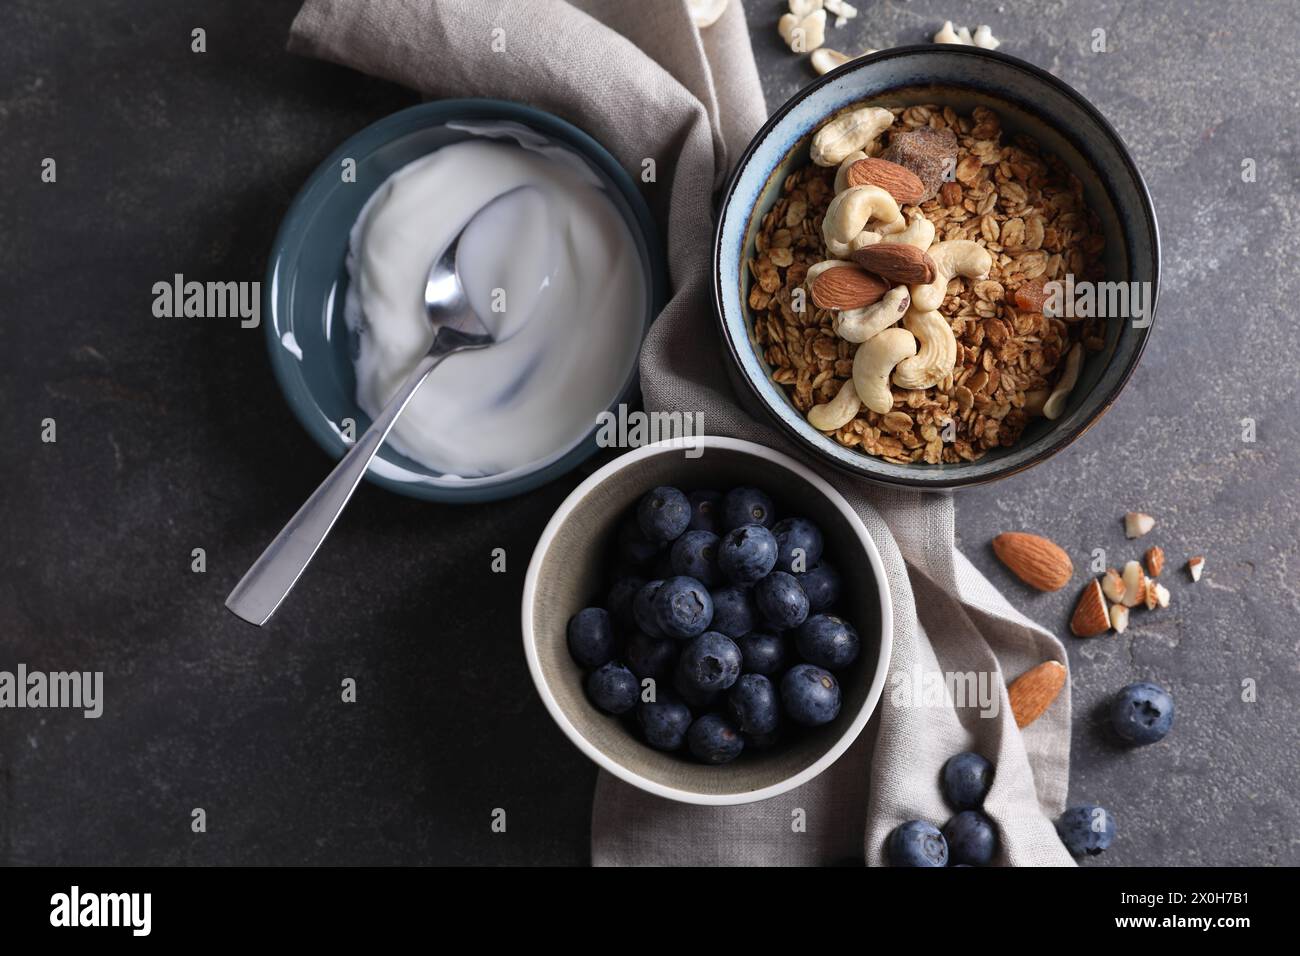 Tasty granola in bowl, blueberries, yogurt and spoon on gray textured table, flat lay Stock Photo